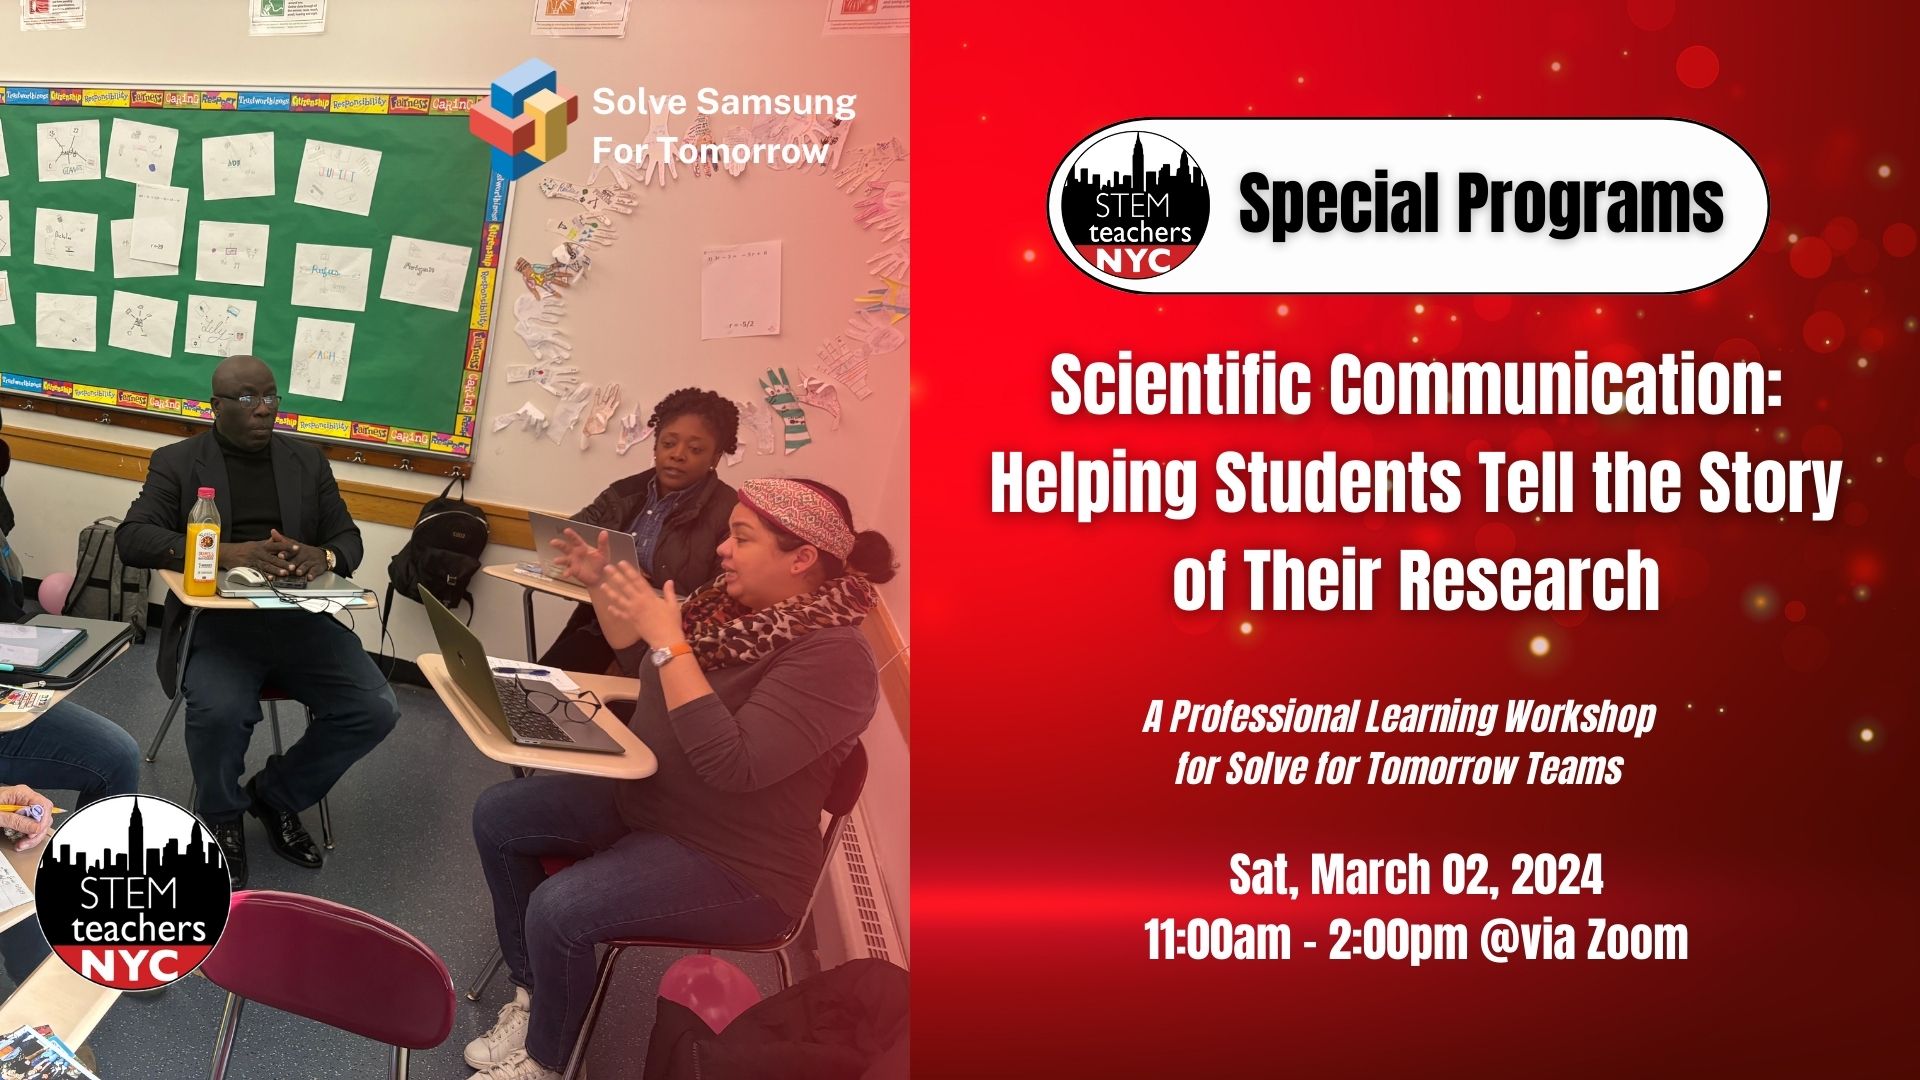 Scientific Communication: Helping Students Tell the Story of Their Research